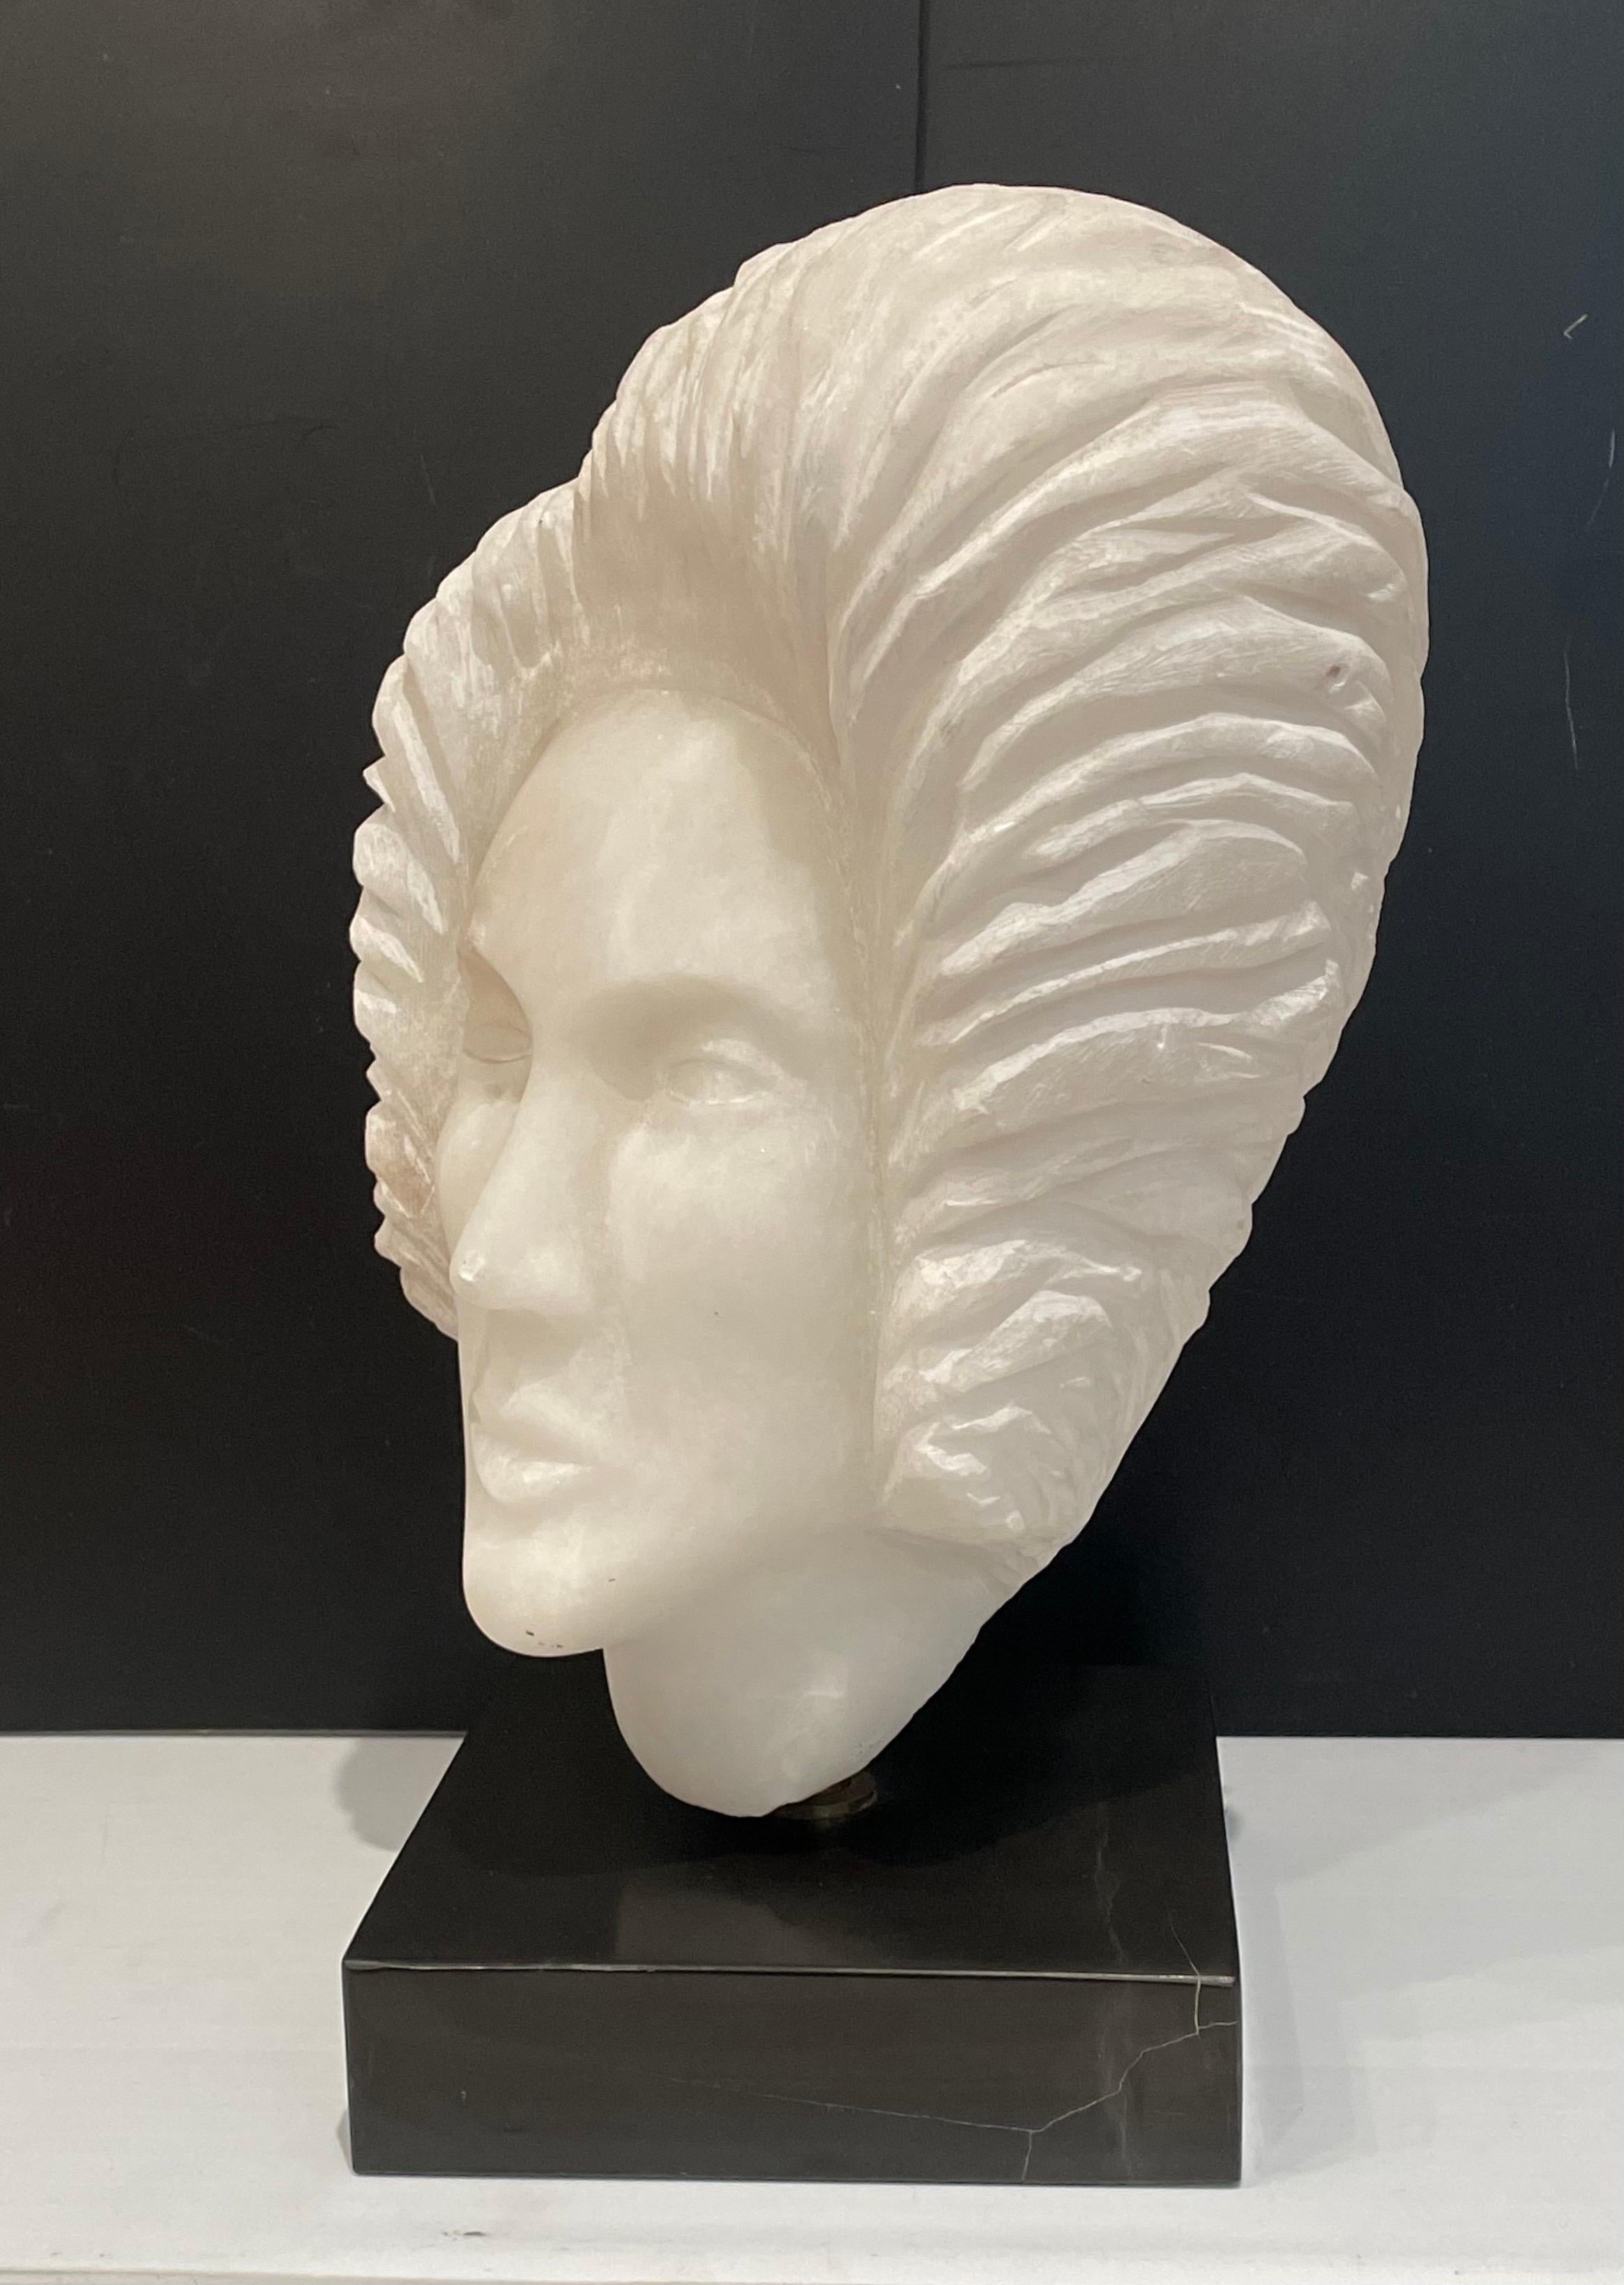 Beautiful hand-carved woman's head sculpture, sitting on a black marble base with a brass pivot that rotates its well done and beautiful circa 1980's not signed.